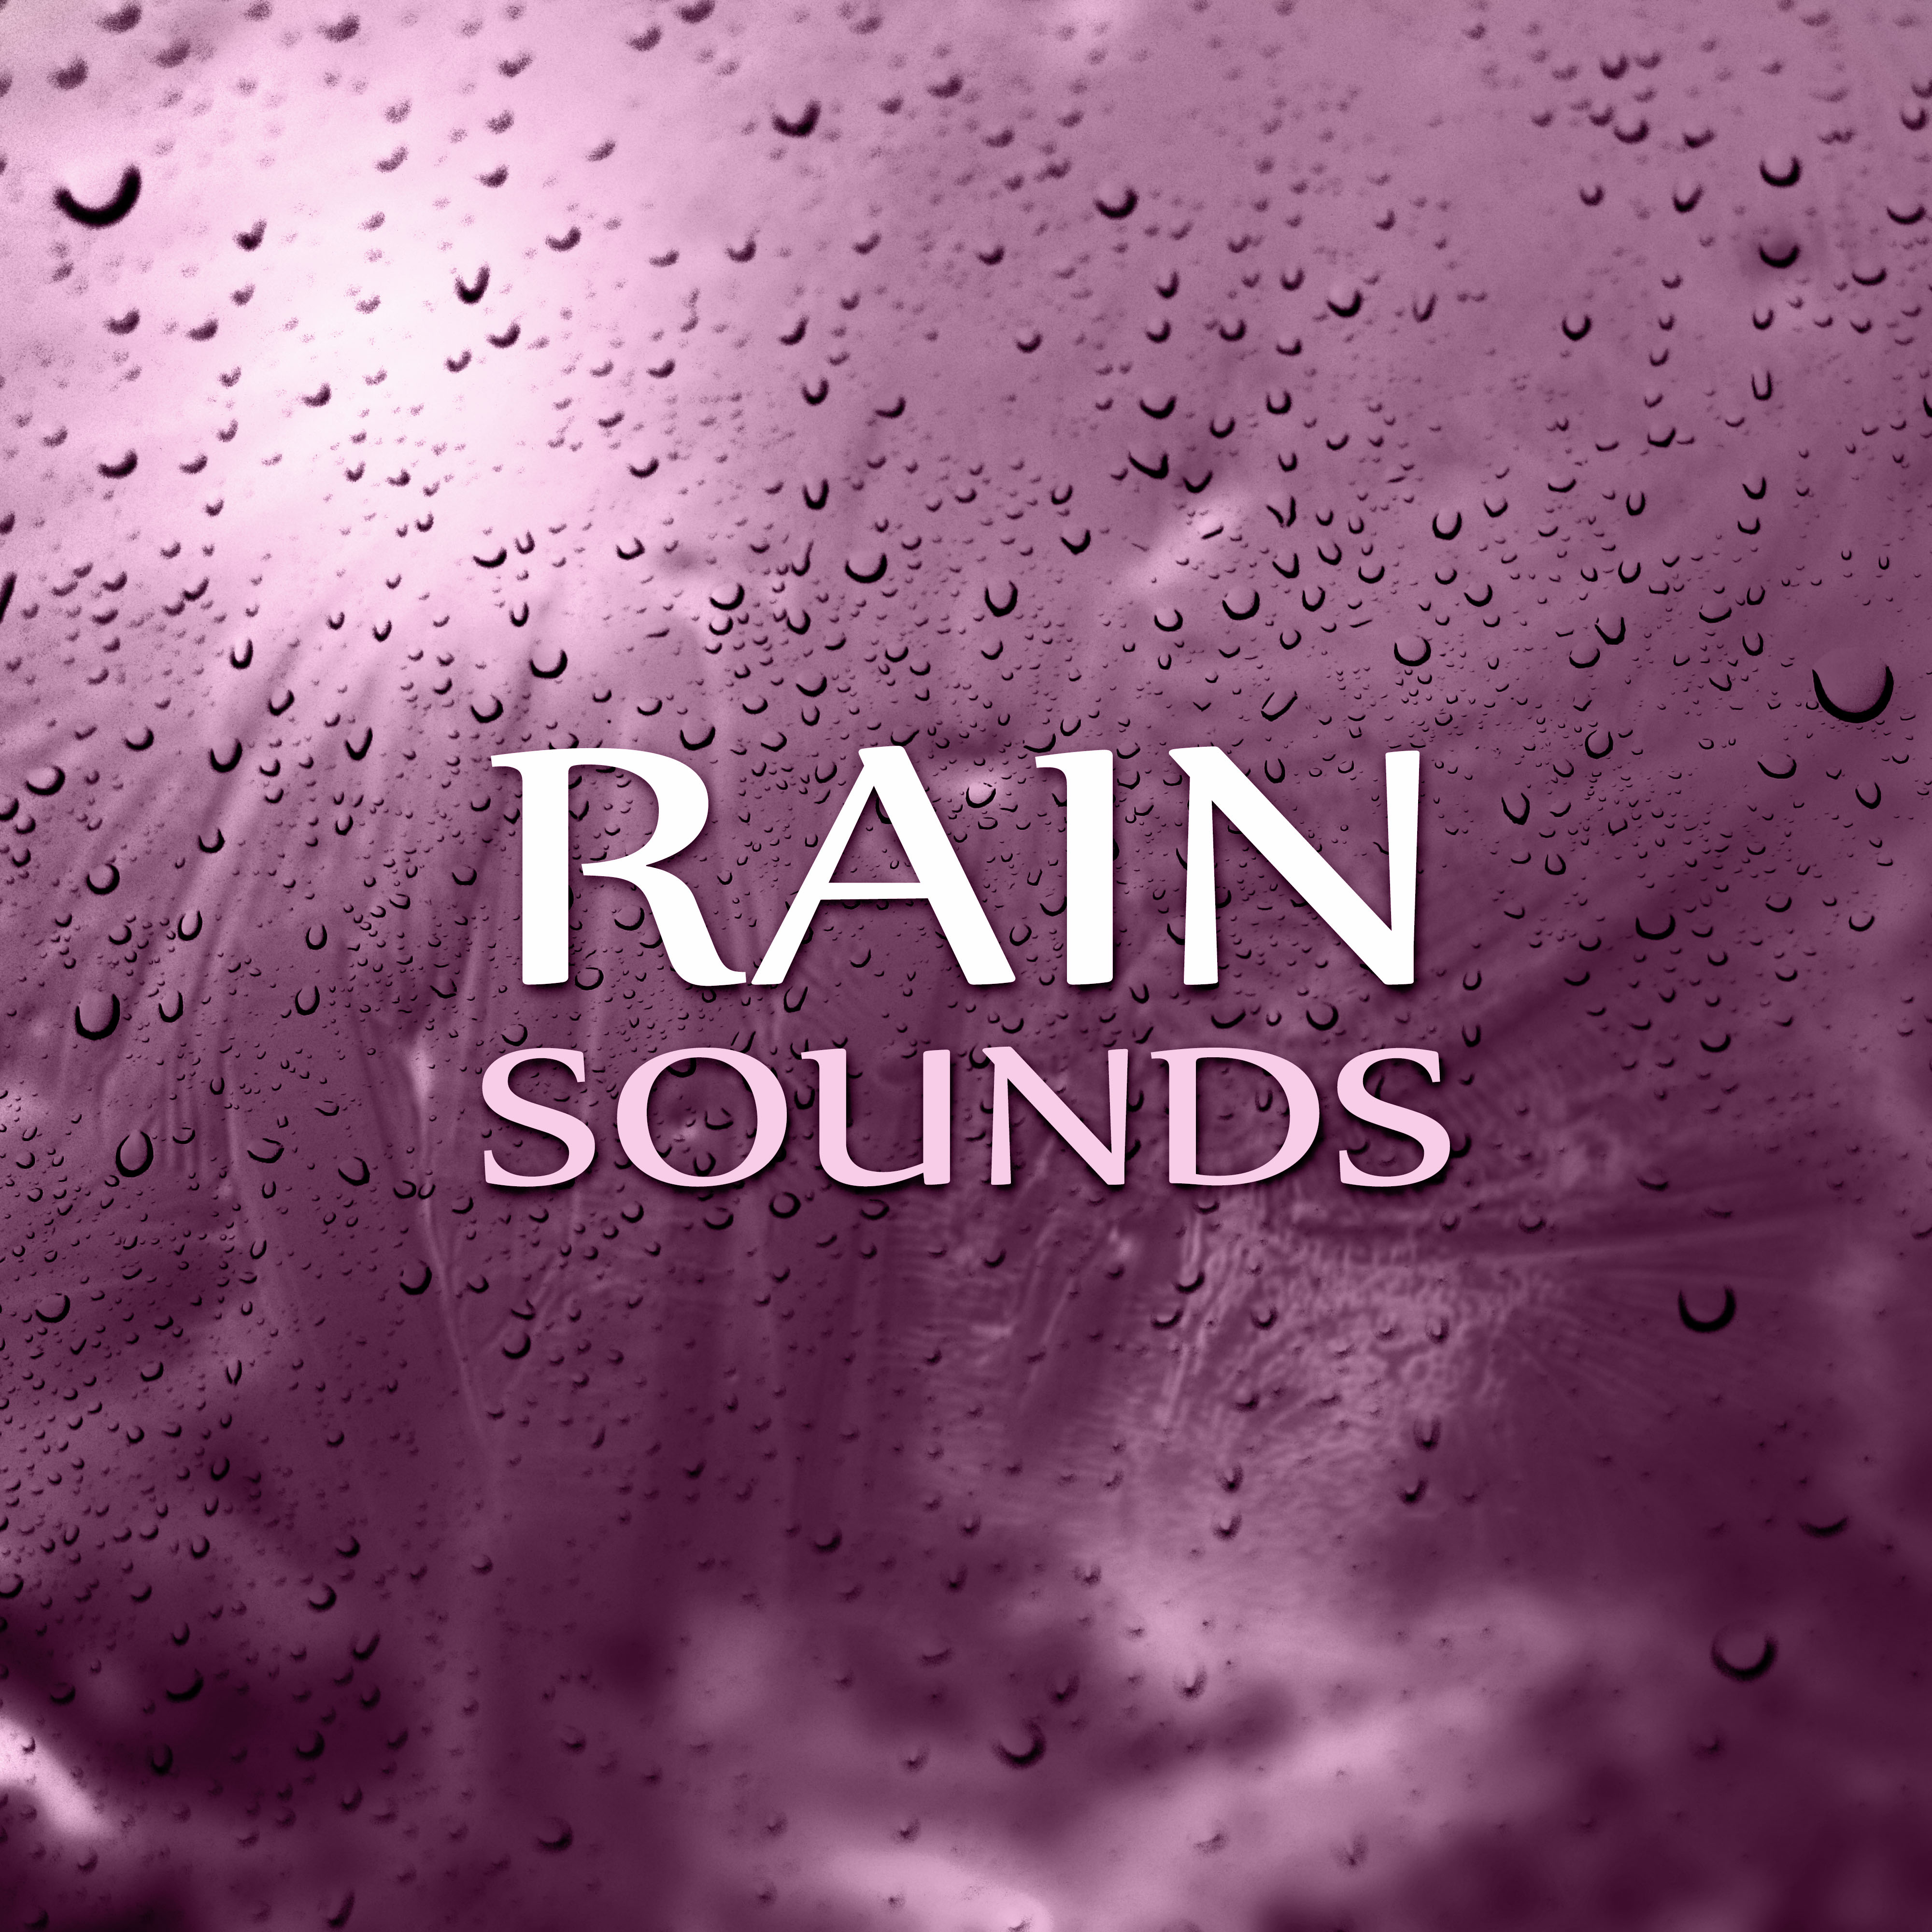 Rain Sounds – Rain Forest, Pacific Ocean Waves, Sound Therapy Music for Relaxation Meditation with Sounds of Nature